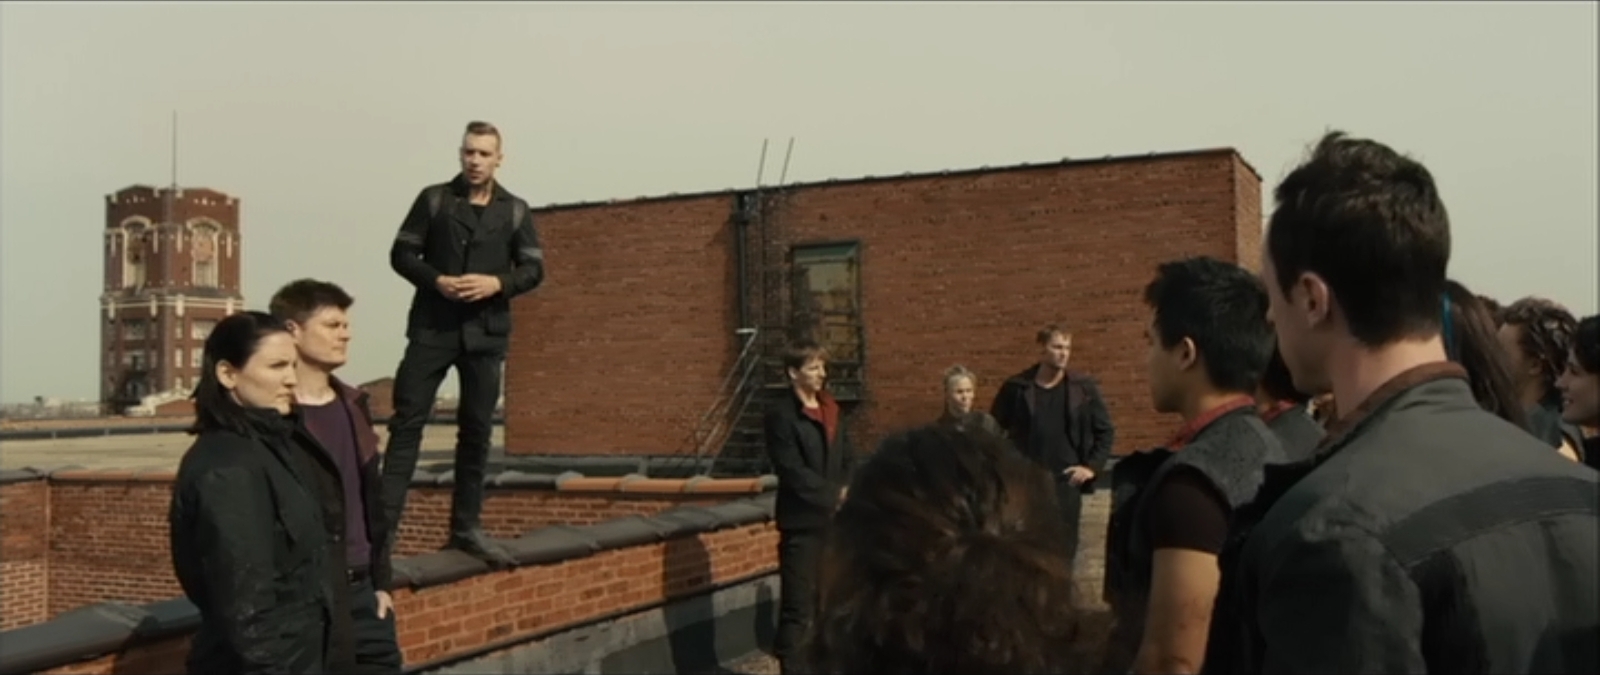 Hanging with Eric on Da Roof. Divergent.